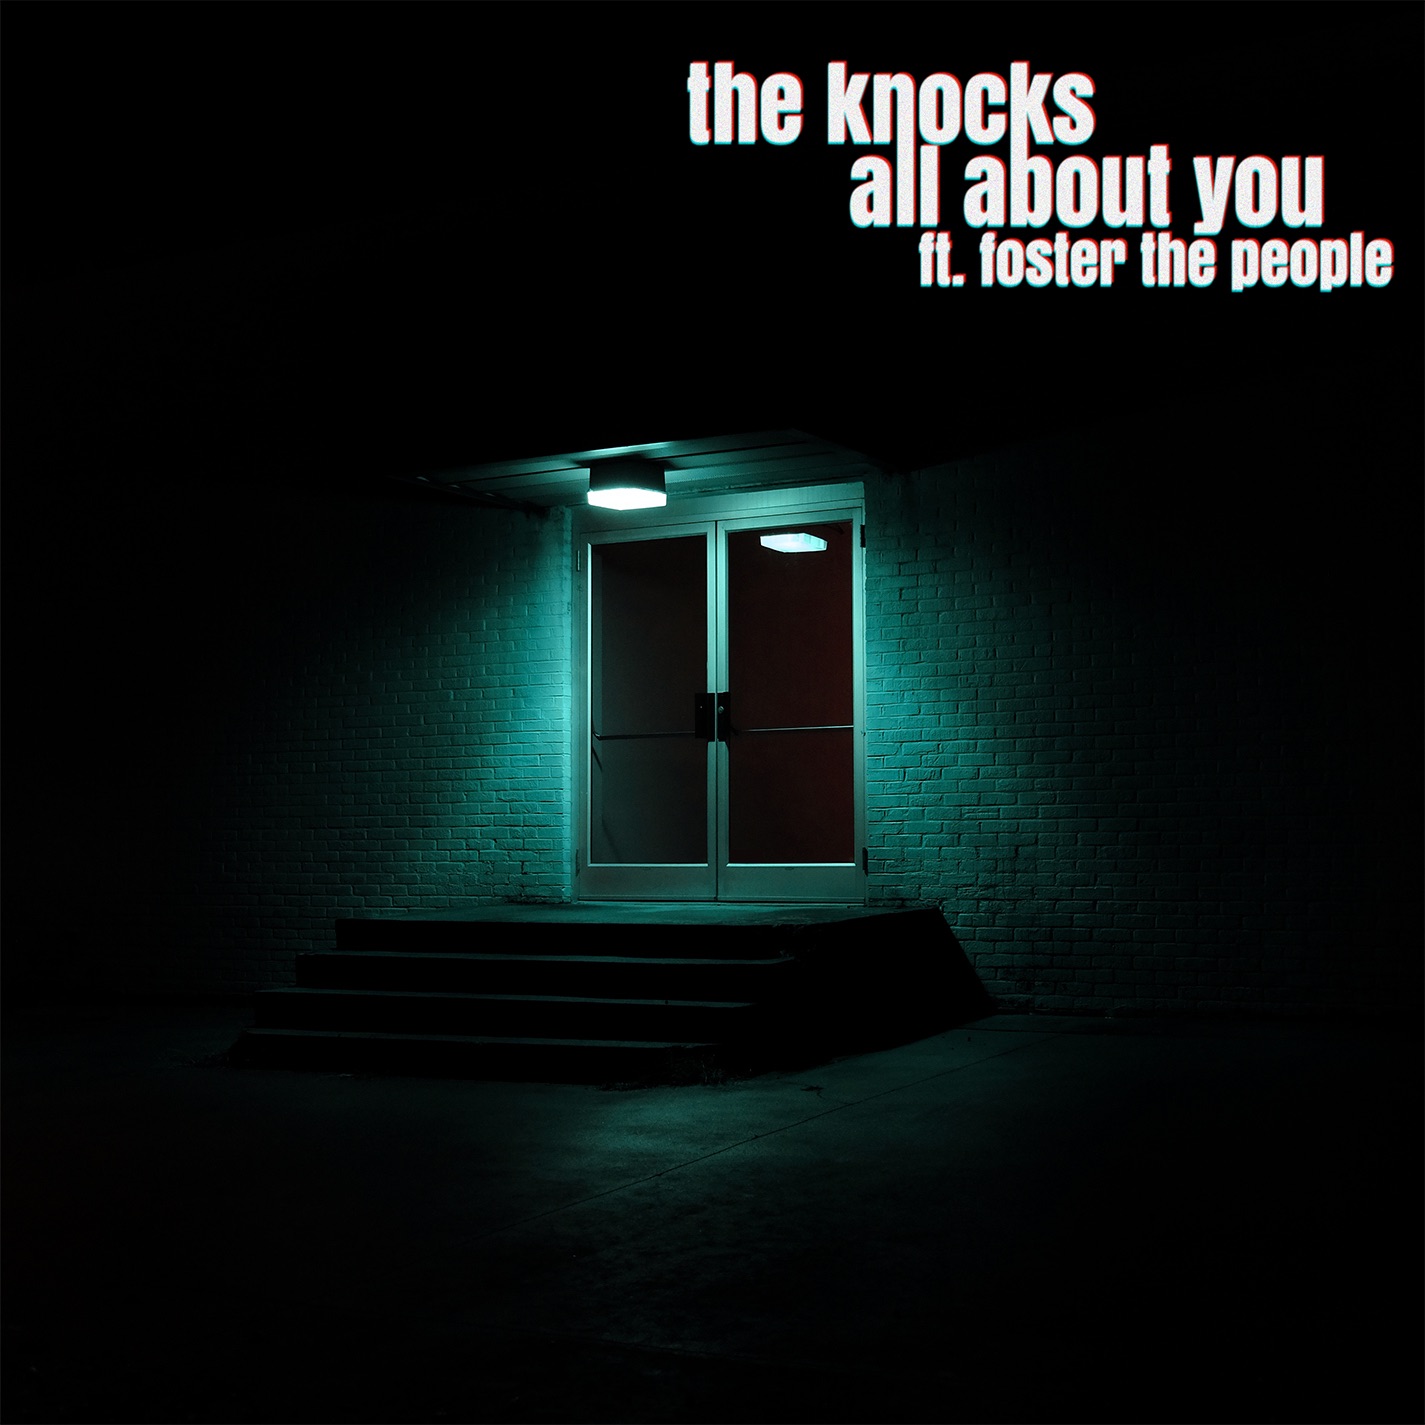 The Knocks - All About You (feat. Foster The People) - Single